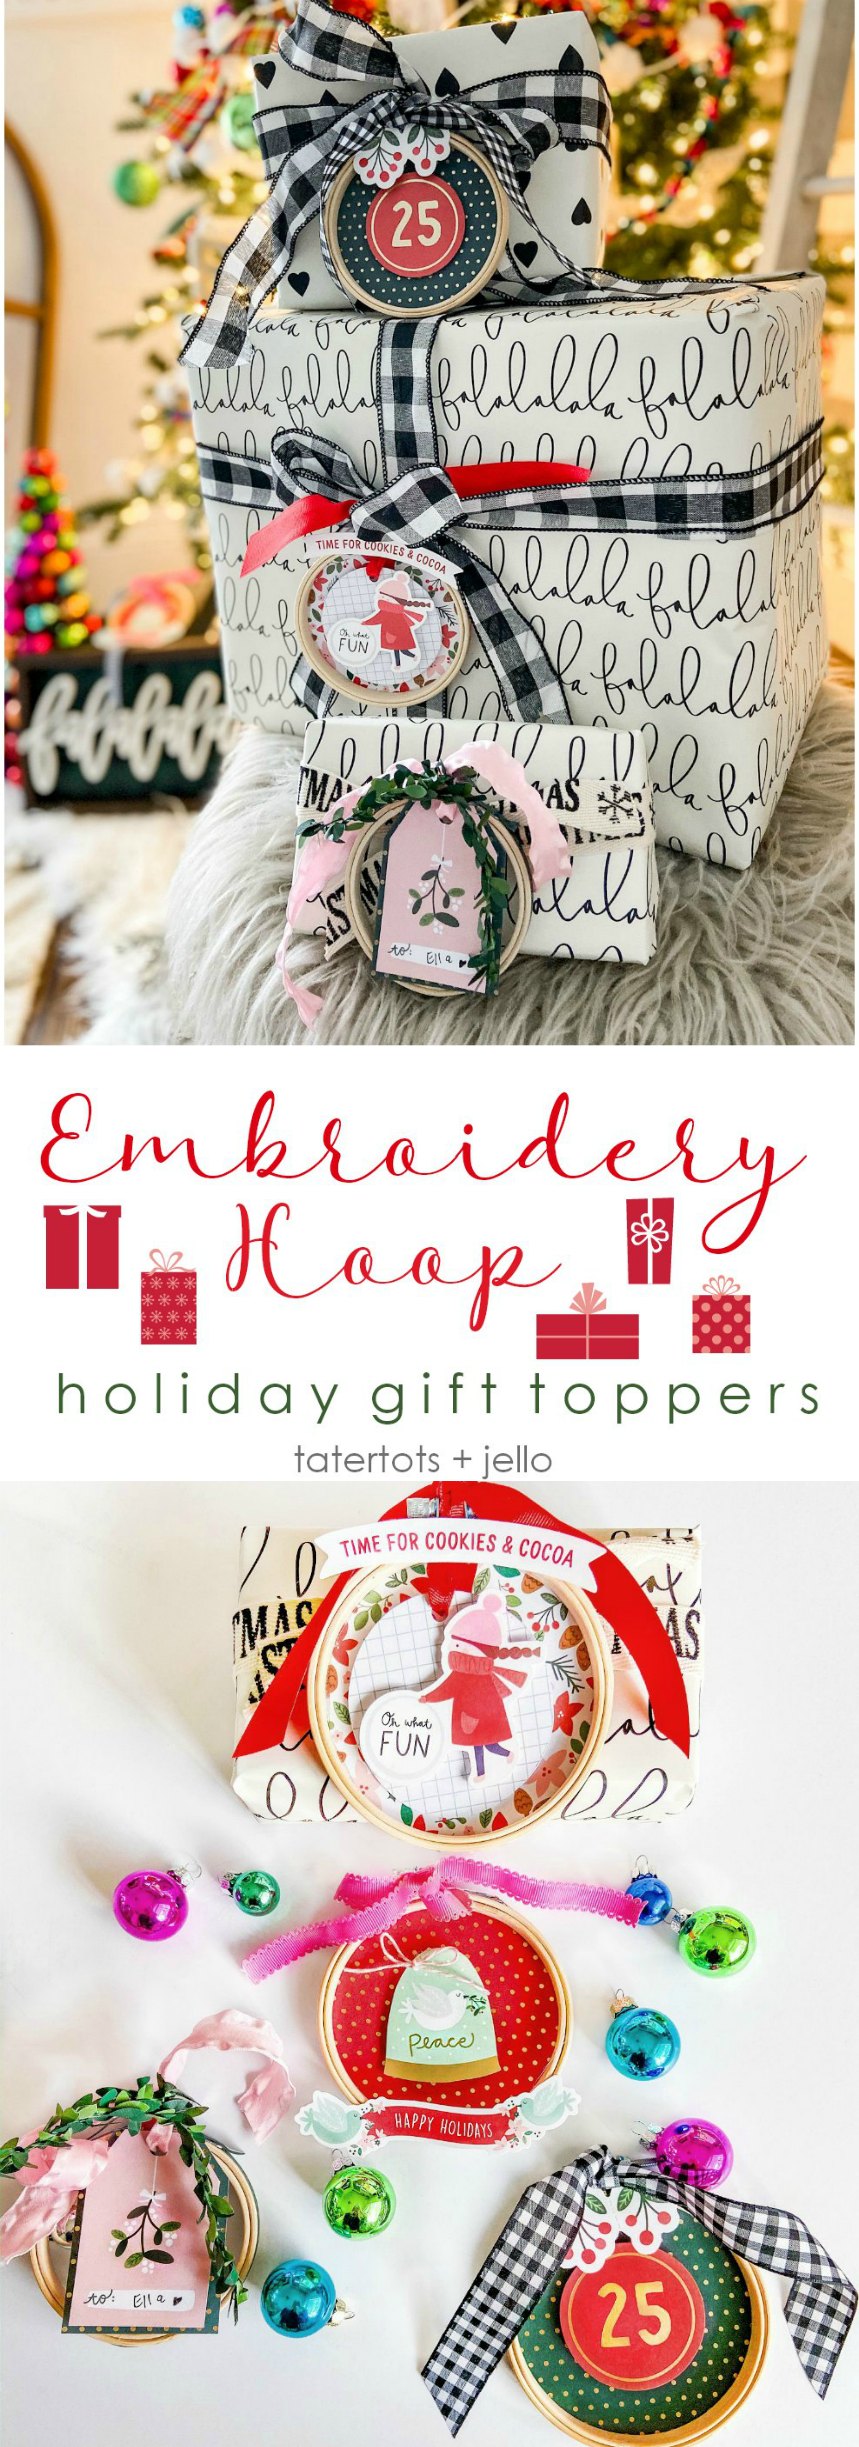 Embroidery Hoop Holiday Gift Toppers. Create adorable holiday gift toppers ornaments with embroidery hoops and paper! They can be used each year as ornaments.